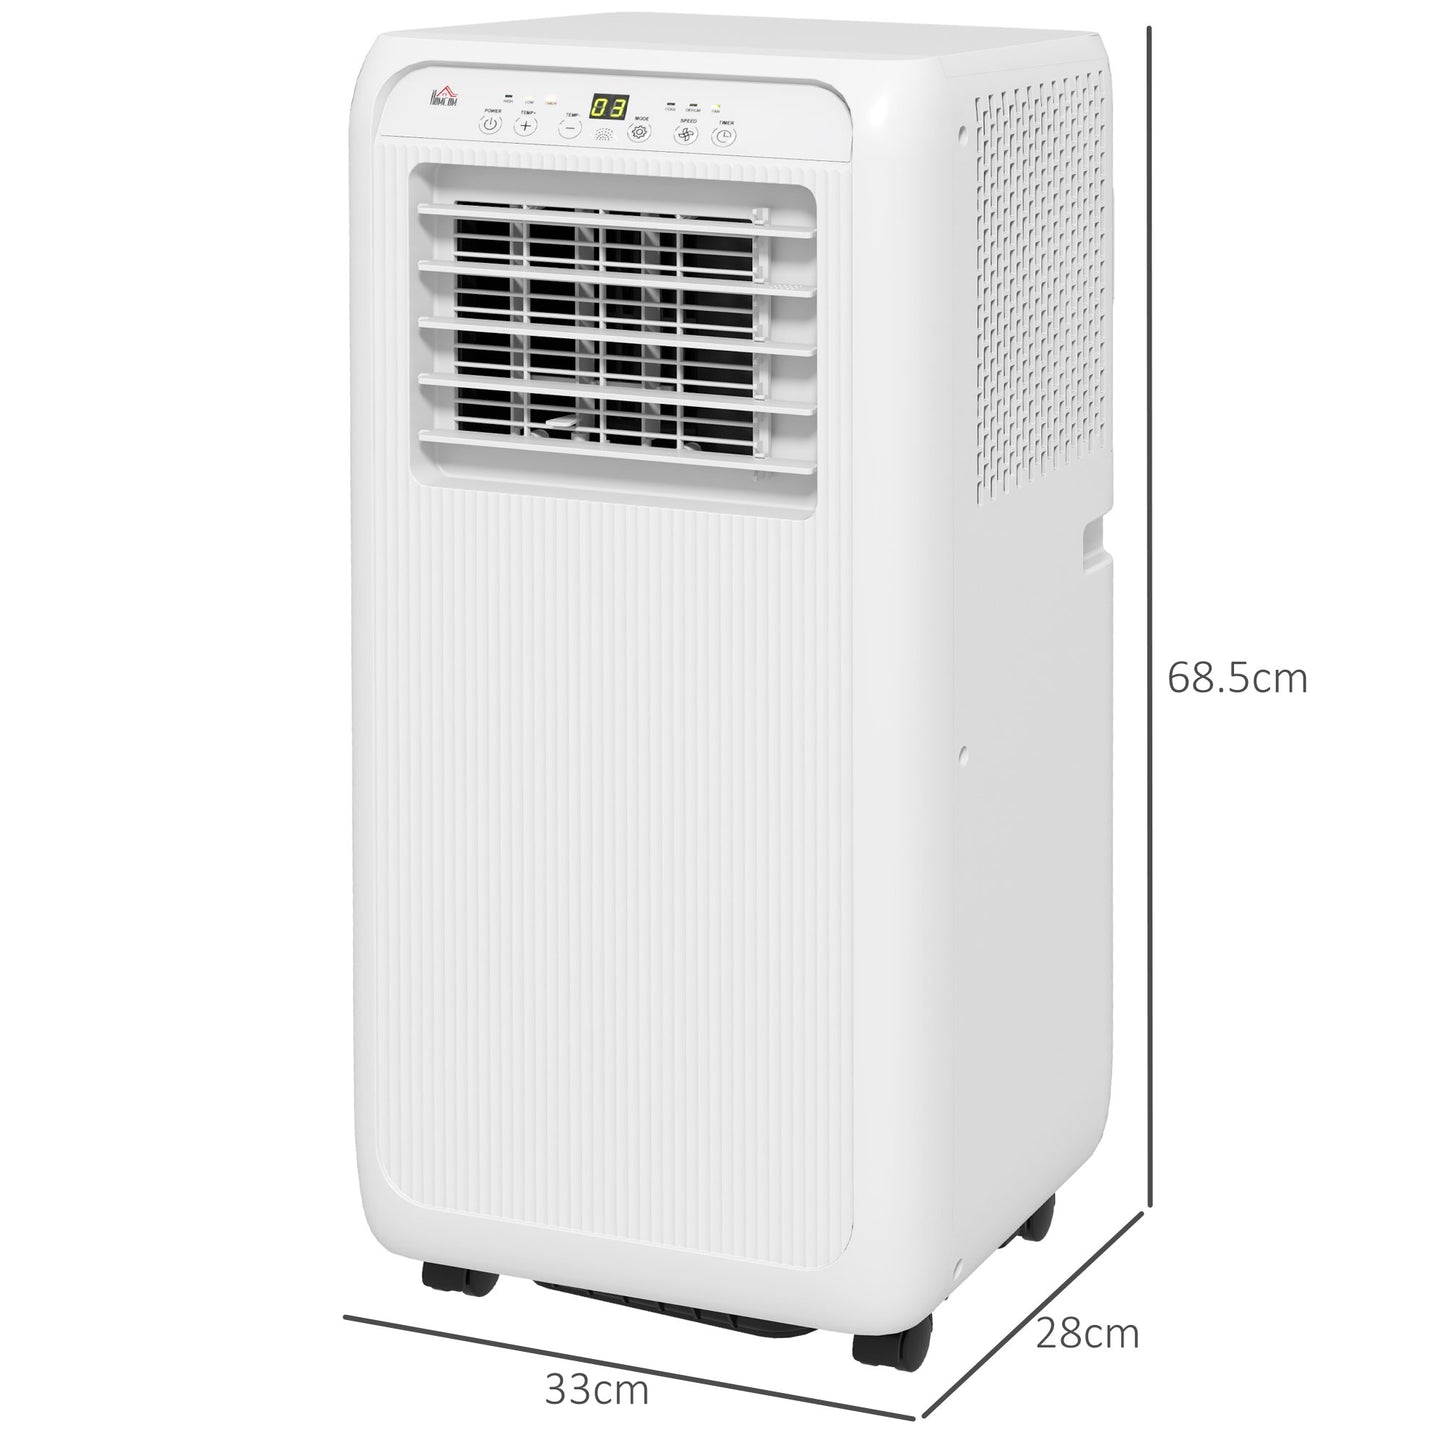 HOMCOM 9,000 BTU Mobile Air Conditioner for Room up to 20m with Dehumidifier 24H Timer Wheels Window Mount Kit